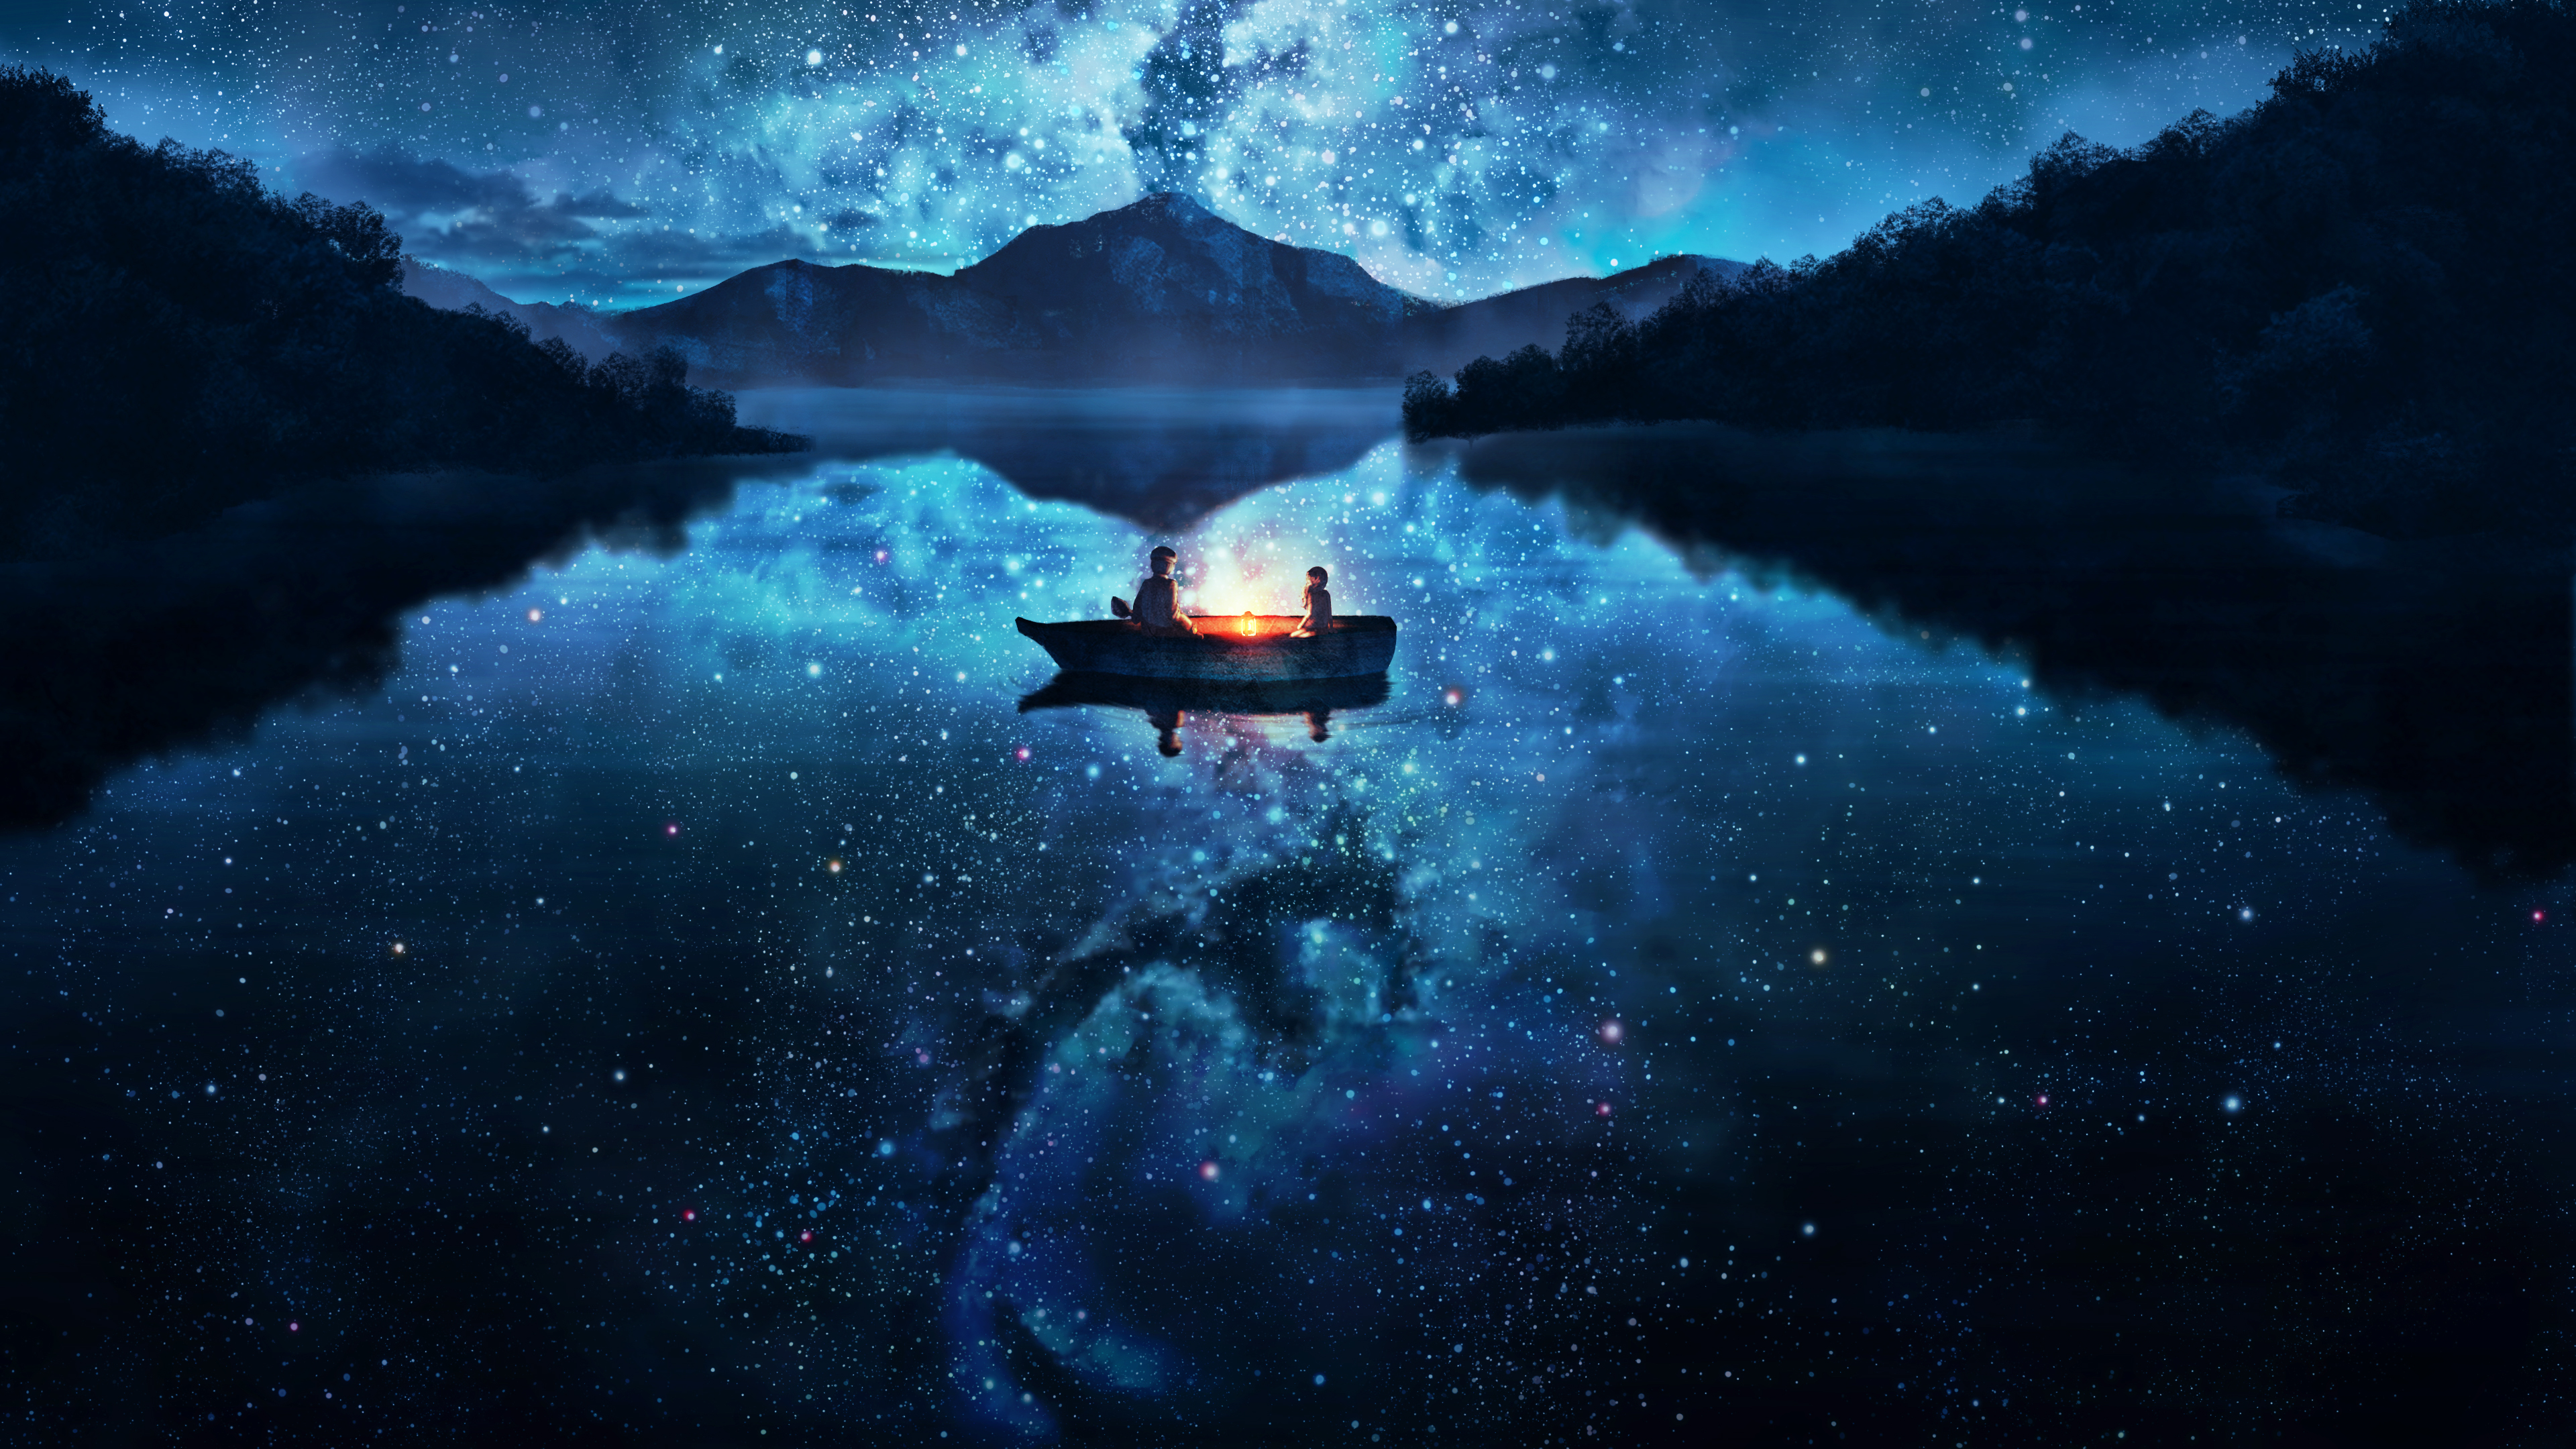 wallpapers anime, lake, night, reflection, starry sky, boat, scenic